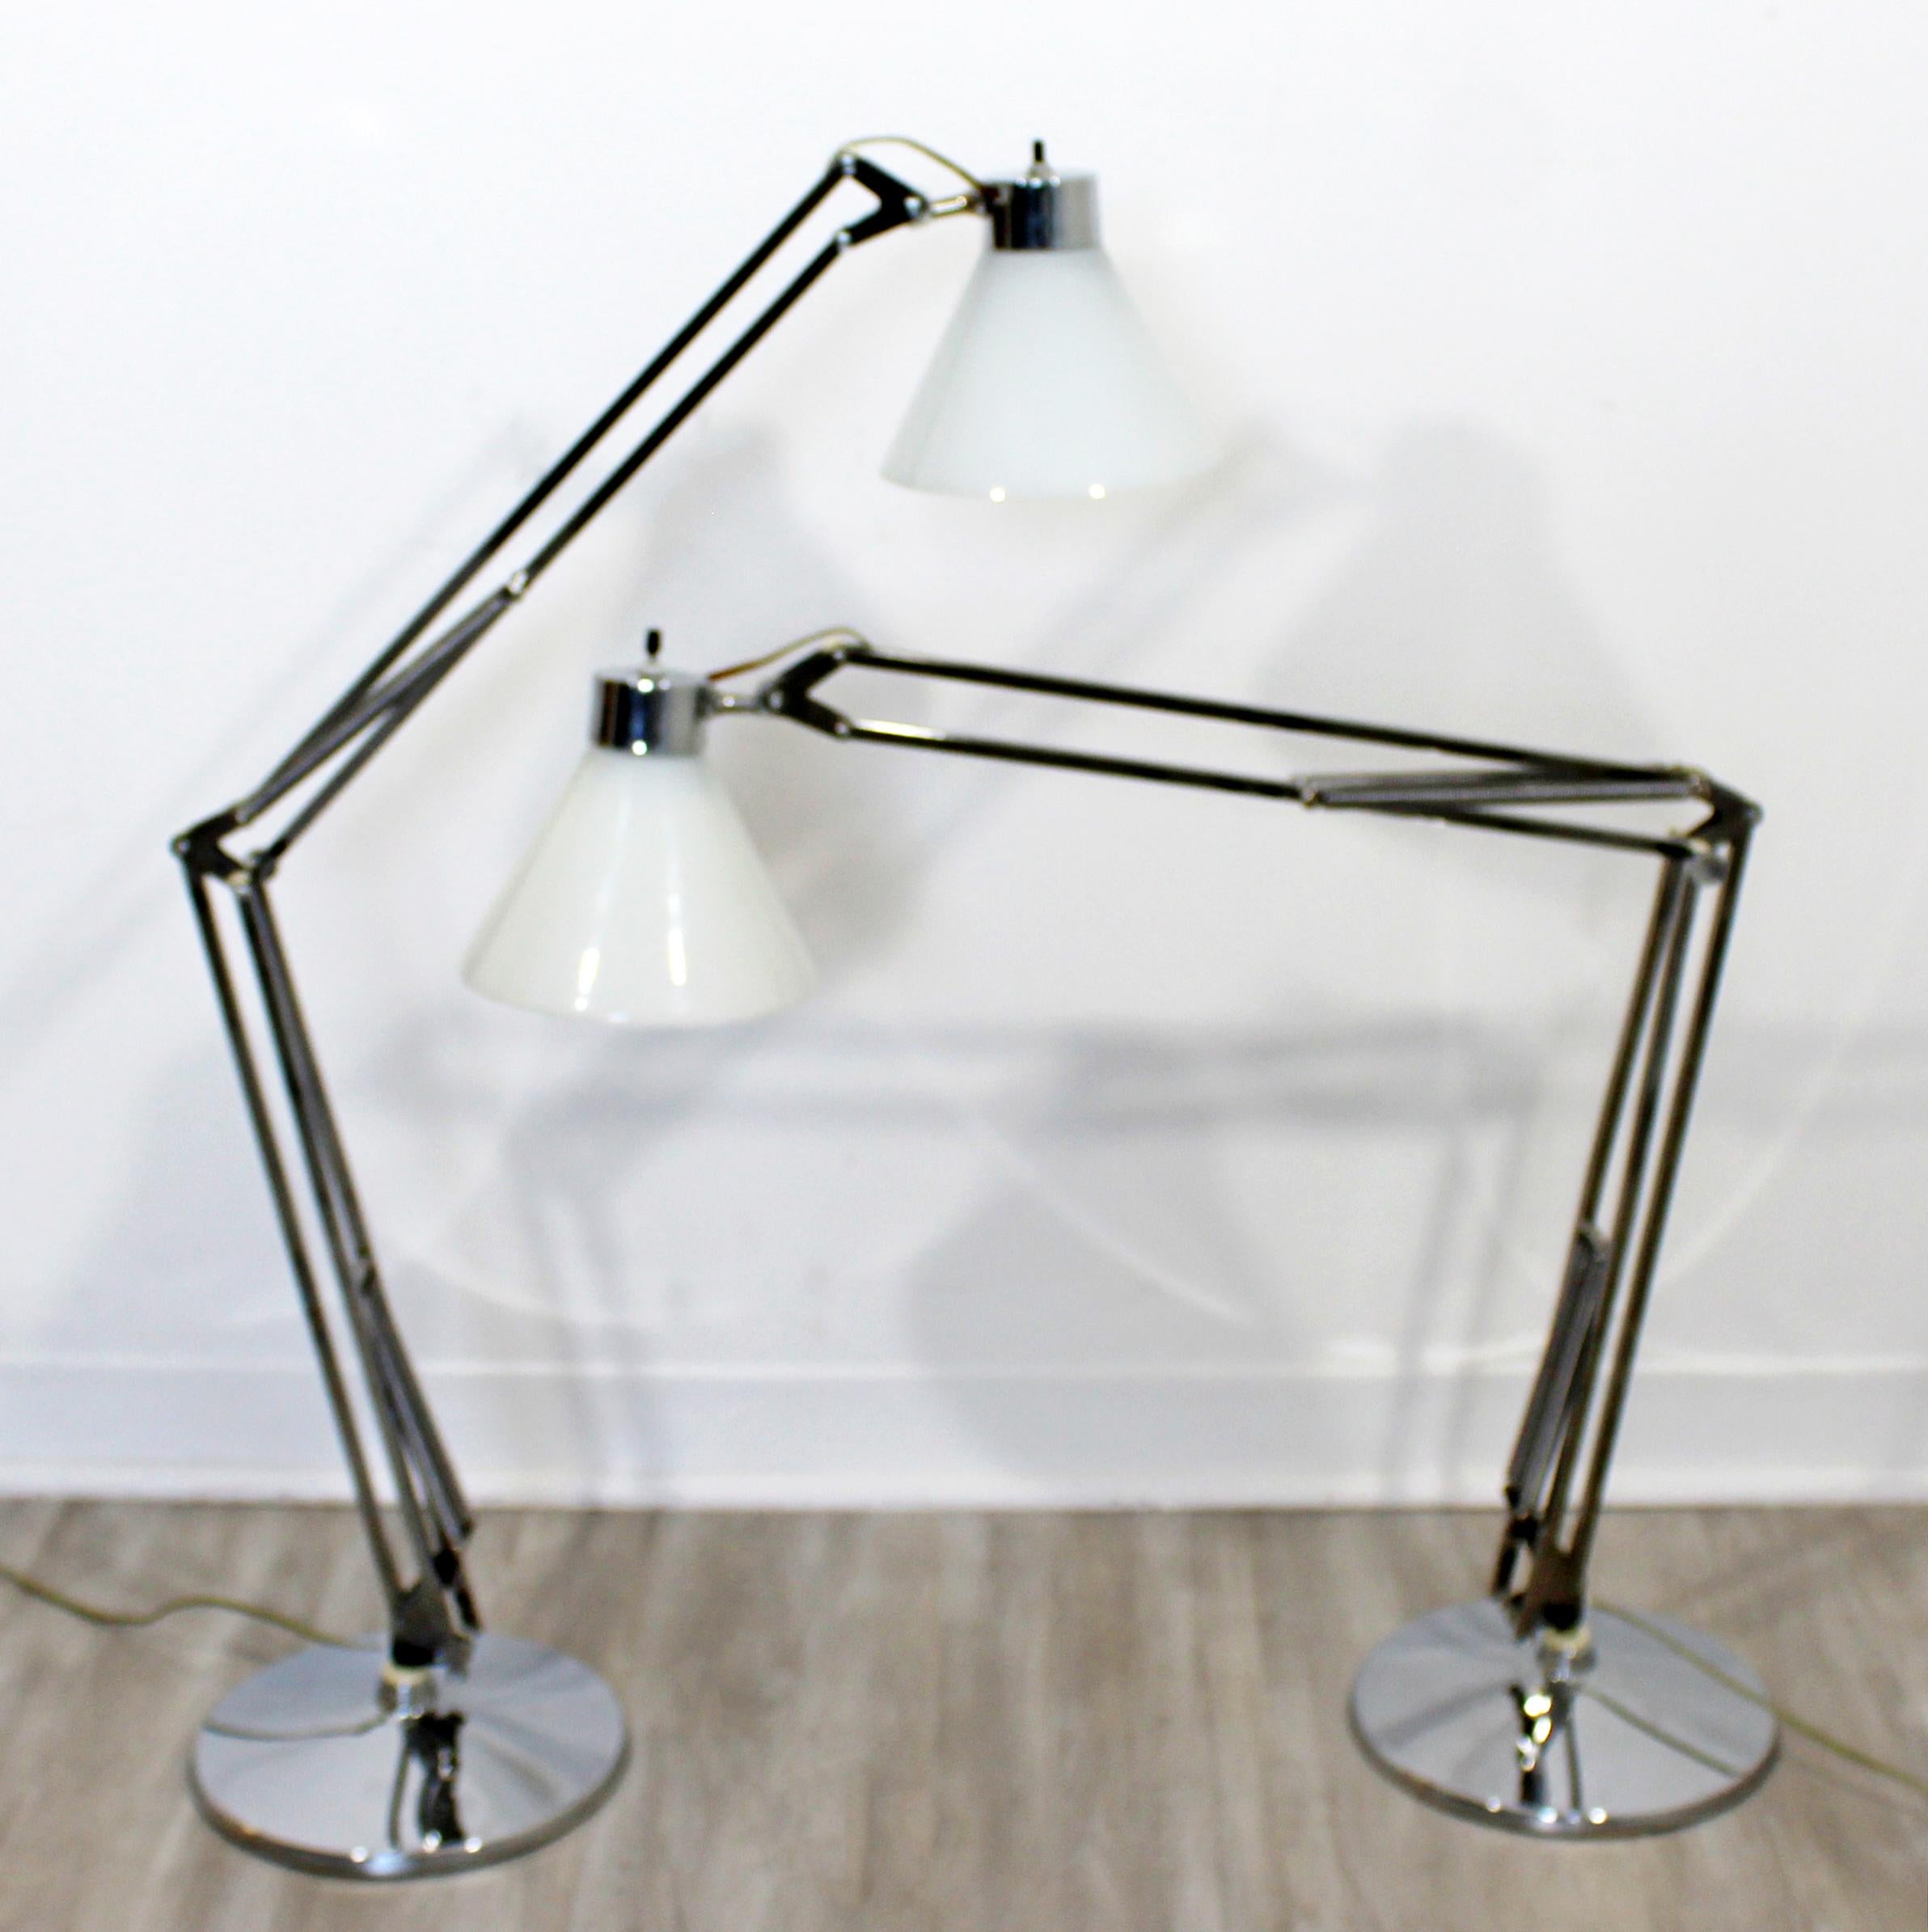 For your consideration is a stupendous pair of adjustable, chrome table lamps, with glass shades, by Luxo, circa 1960s. In excellent vintage condition. The base measures 9.5